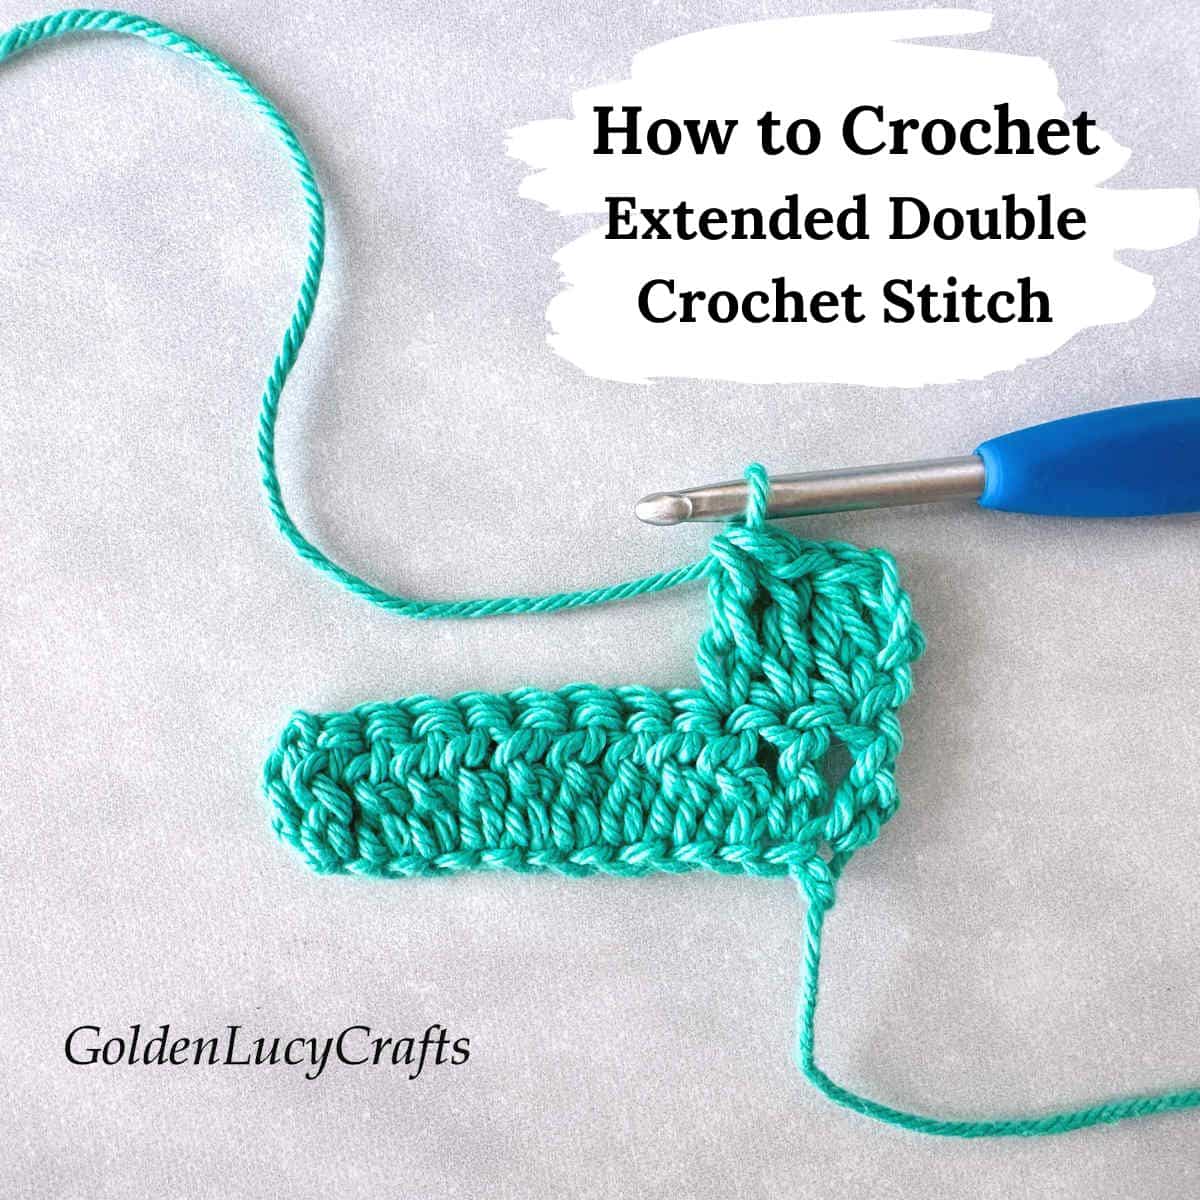 Crocheted sample demonstrated extended double crochet stitch.